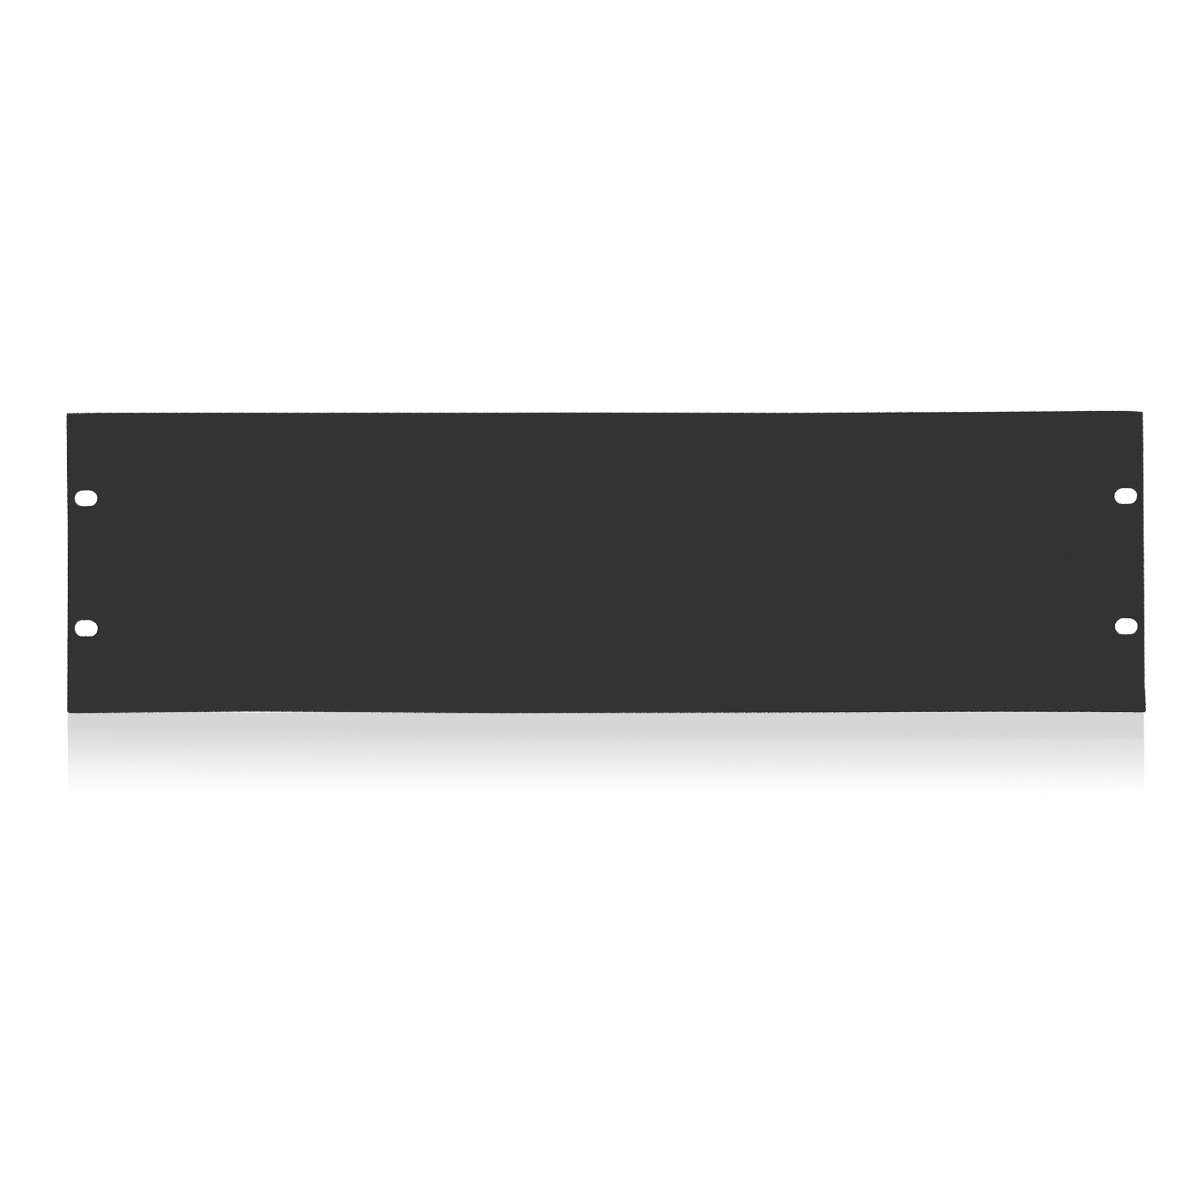 Details about   NEW PROCONNECT 3 U BLANK RACK METAL PANEL 19 INCHES PCT3UBLANK